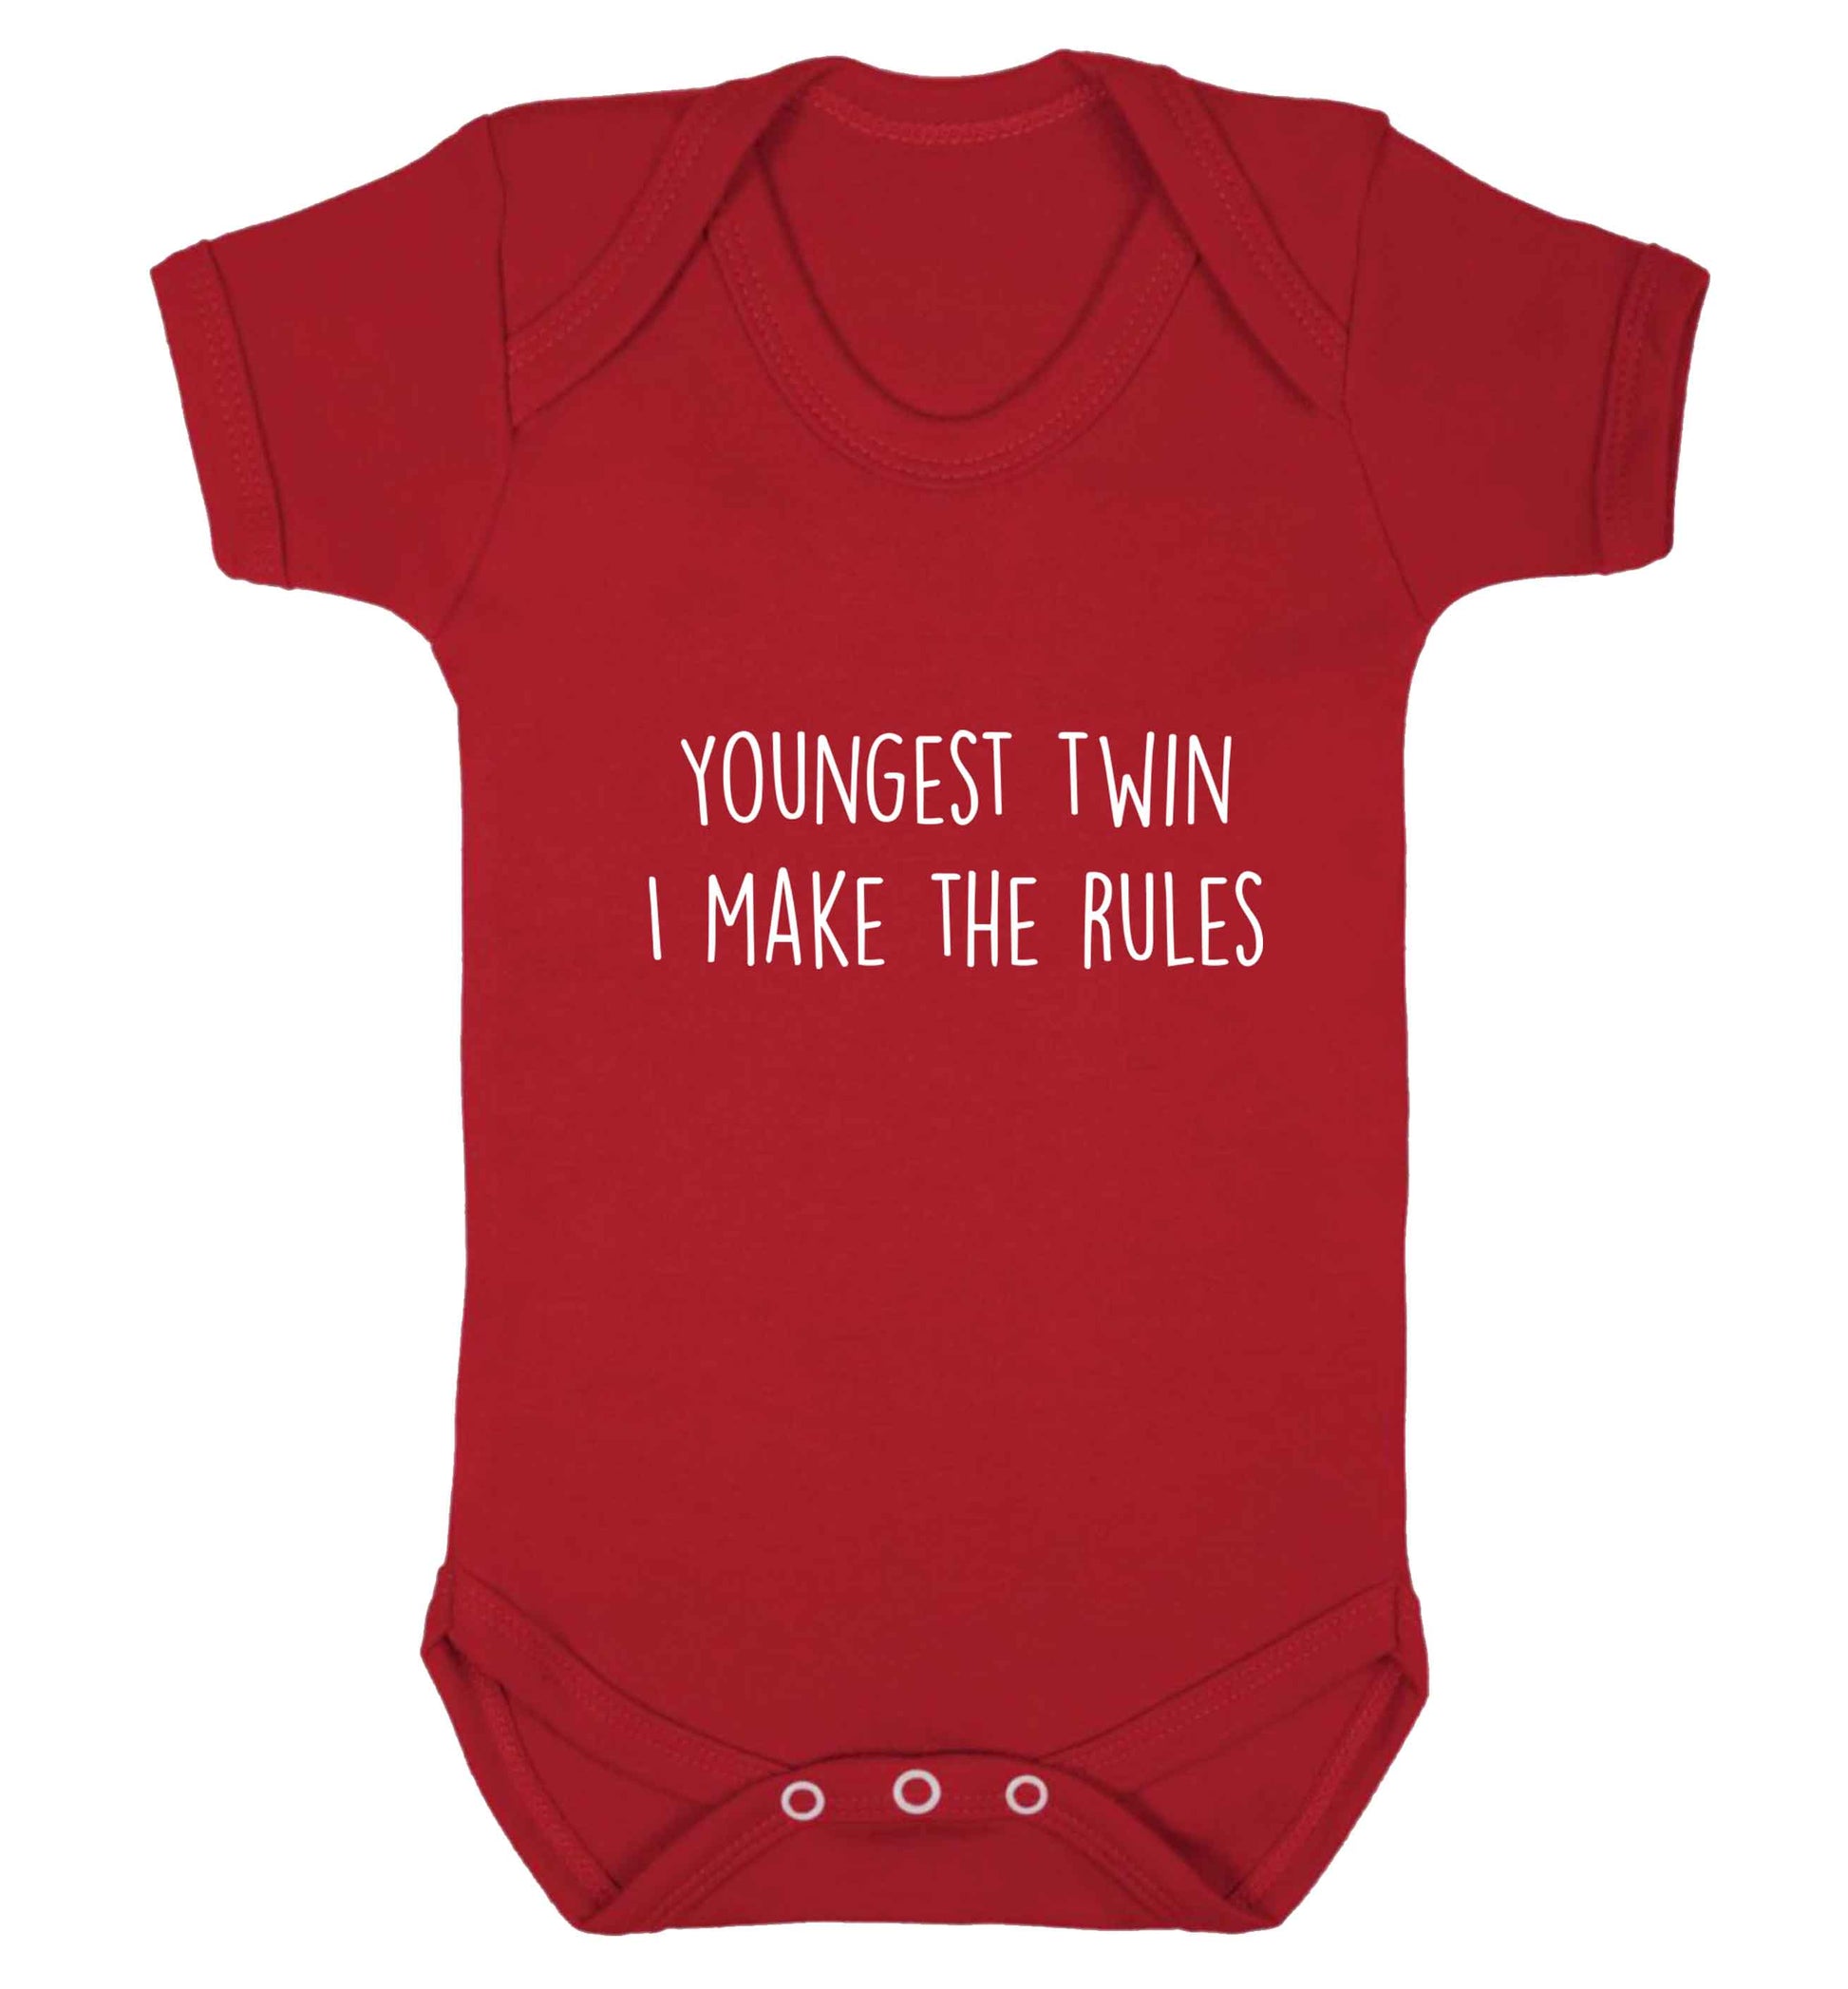 Youngest twin I make the rules baby vest red 18-24 months